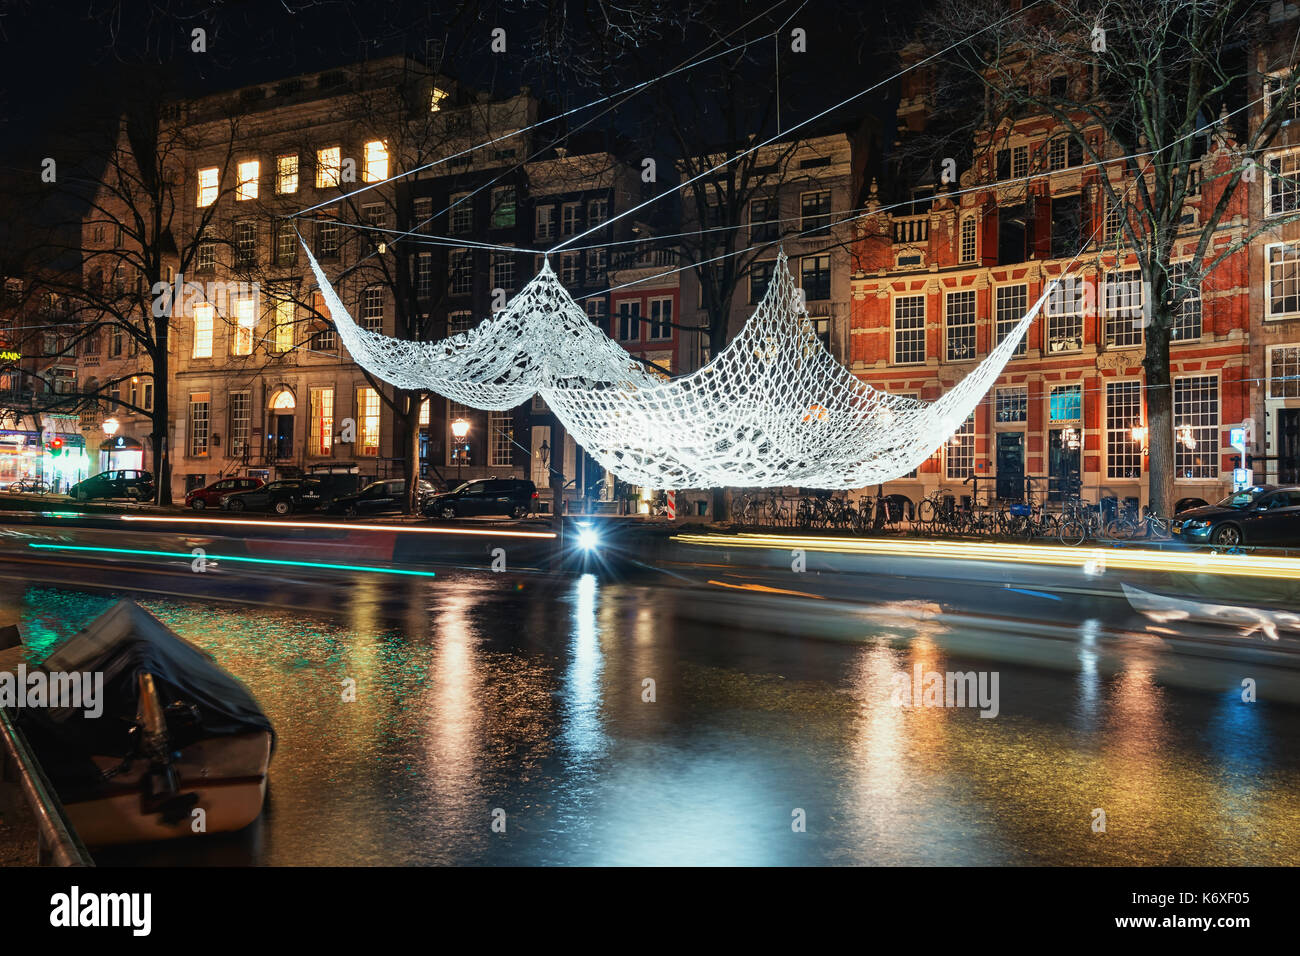 Amsterdam, Netherlands, January 5, 2017: Crochet and illuminated giant bedspread float above a canal during the Festival of Light in Amsterdam Stock Photo